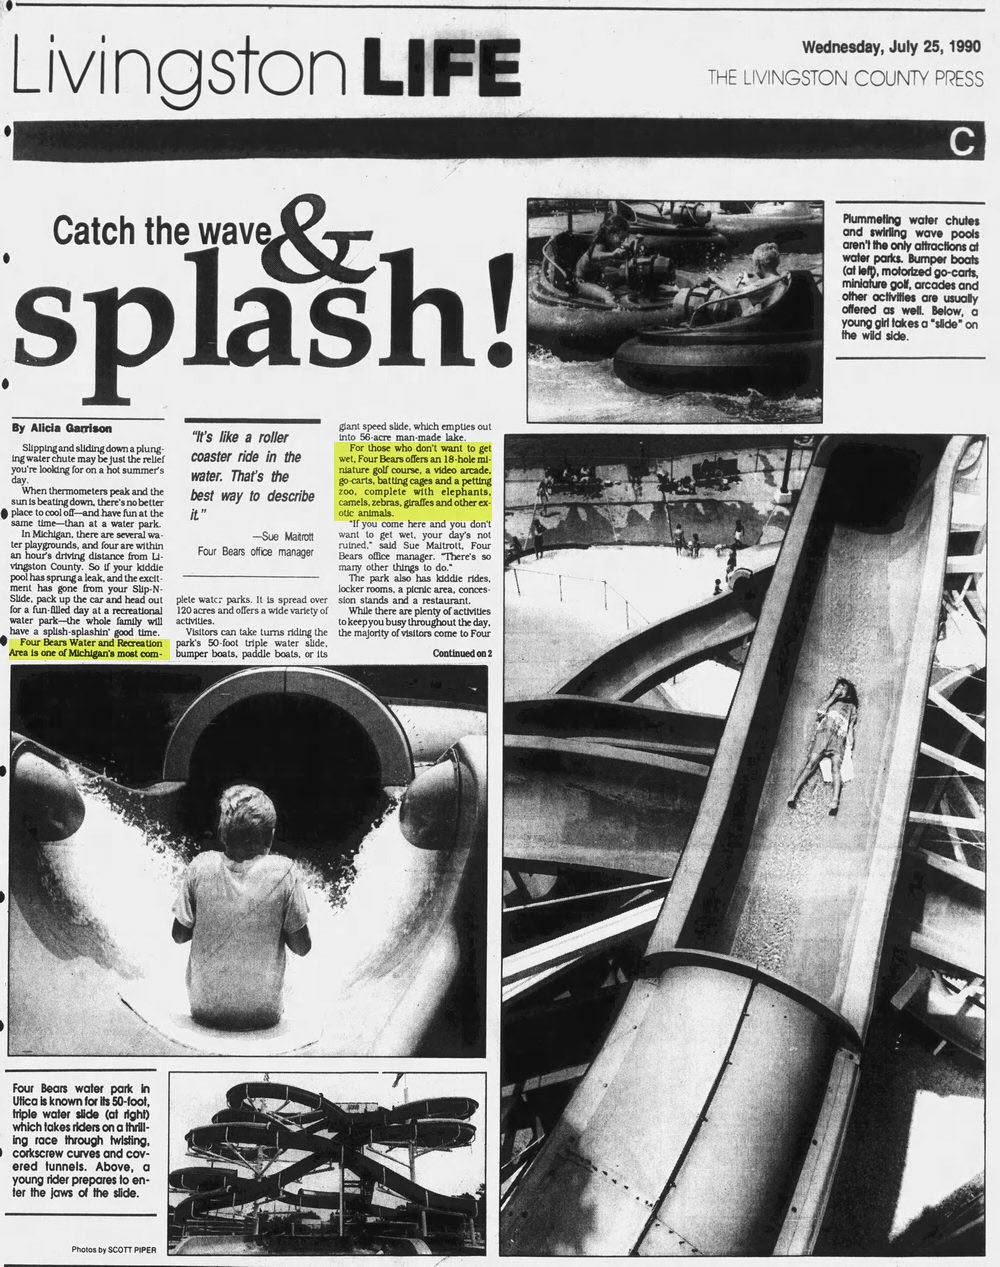 Four Bears Water Park - 1990 Article From Livingtson County Press